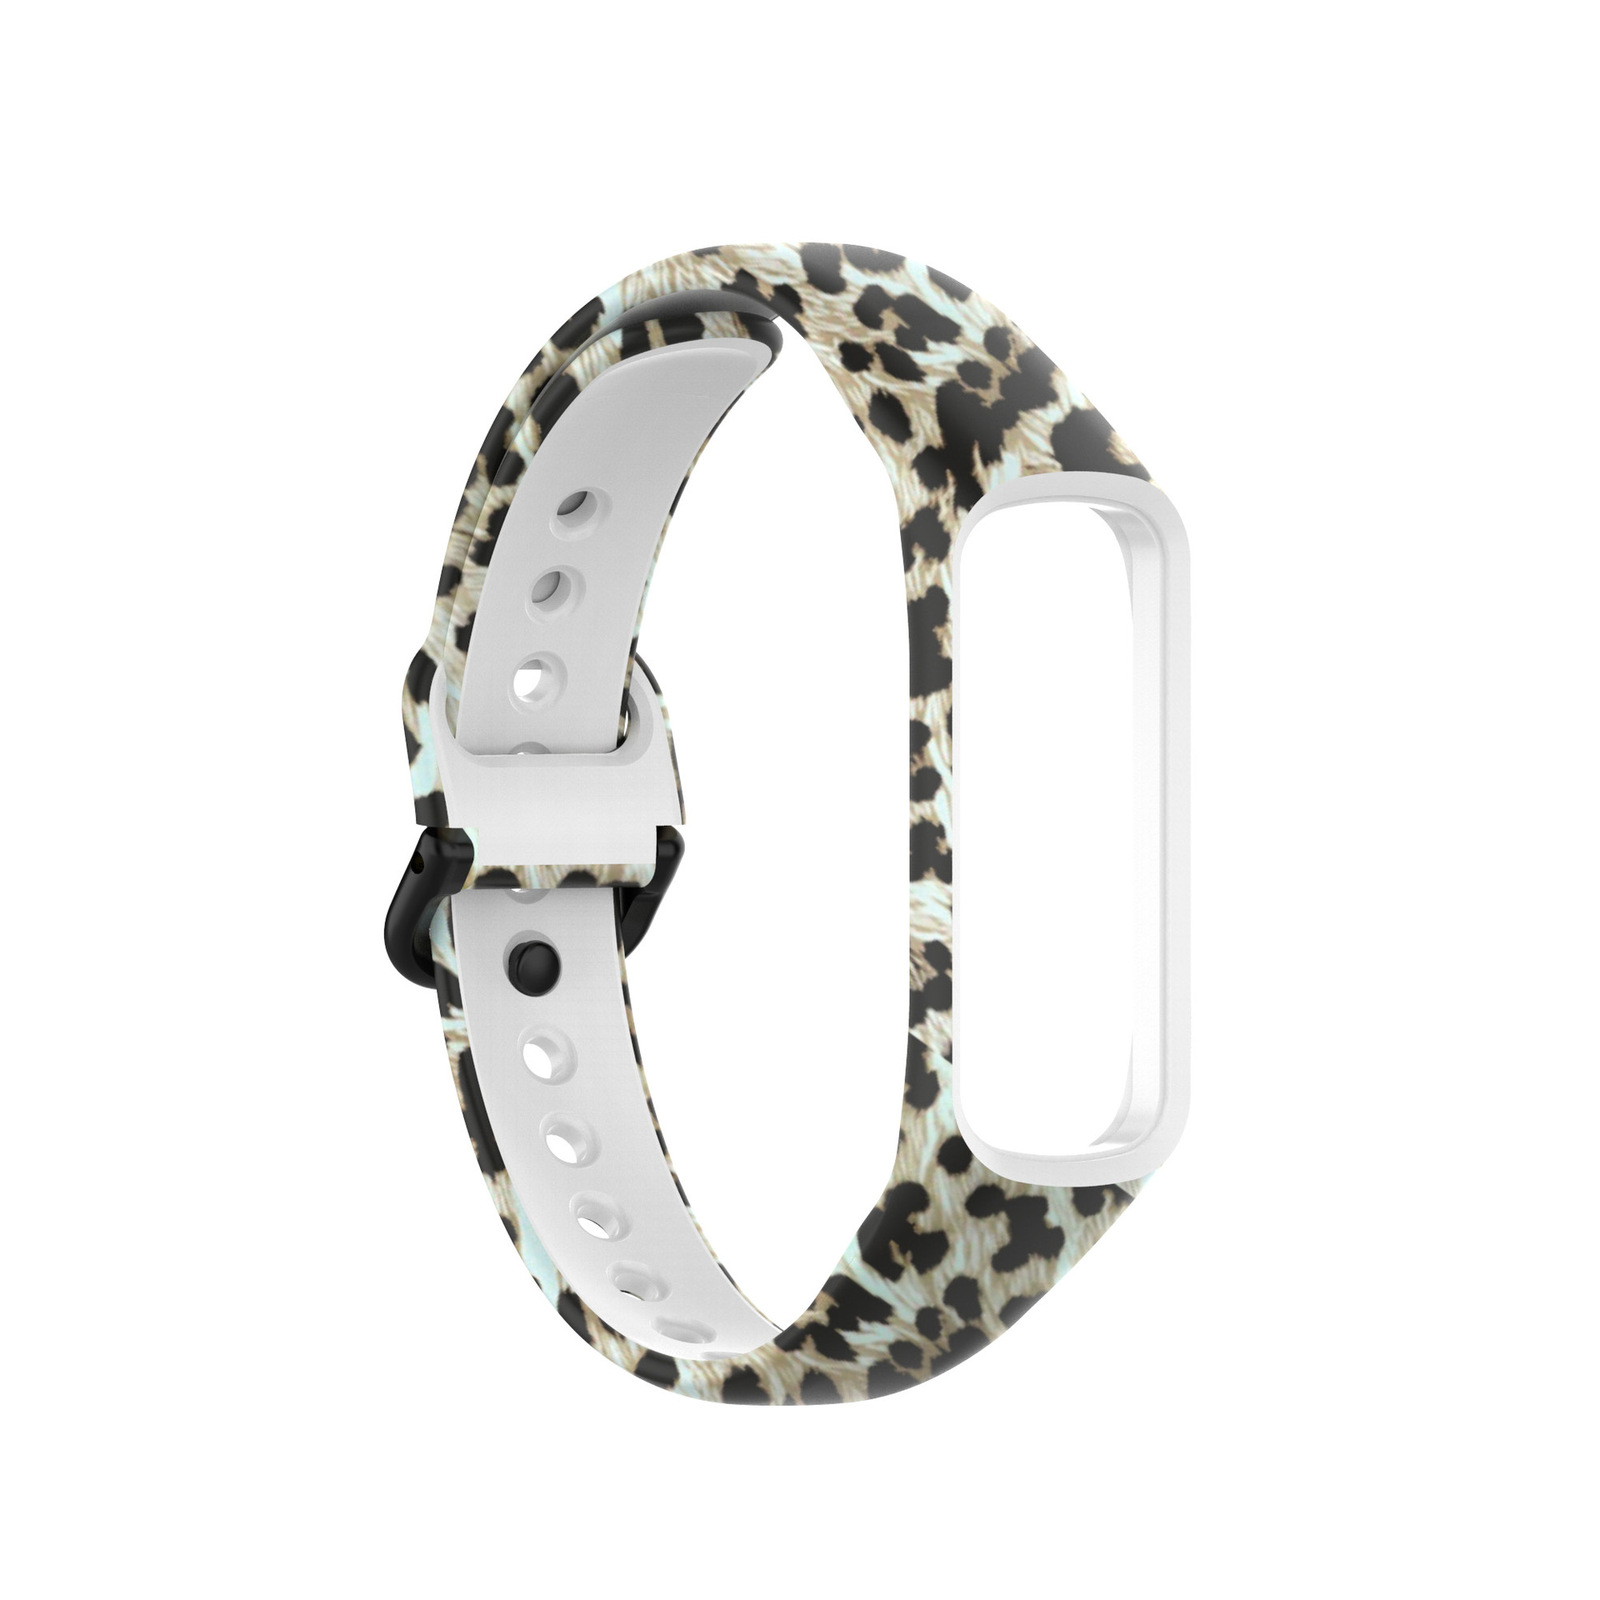 Smart Watch Band for Samsung Galaxy Fit2 Brown Leopard Print